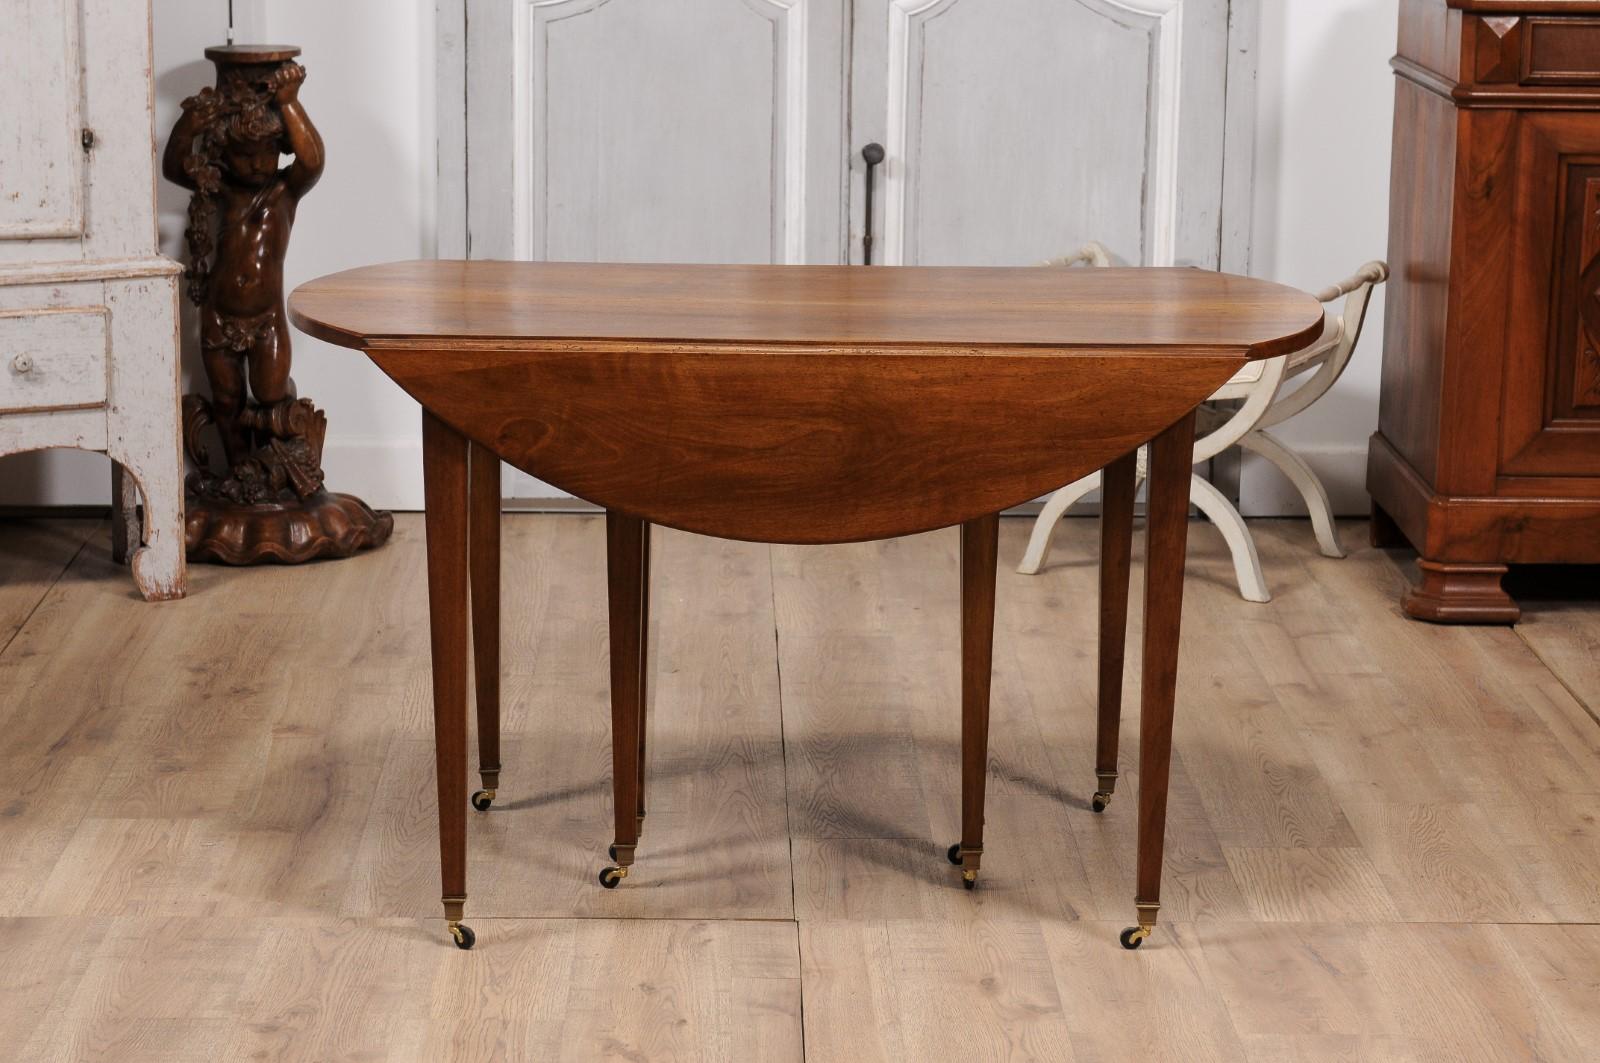 20th Century French Turn of the Century Extension Walnut Table With Five Leaves Circa 1900 For Sale